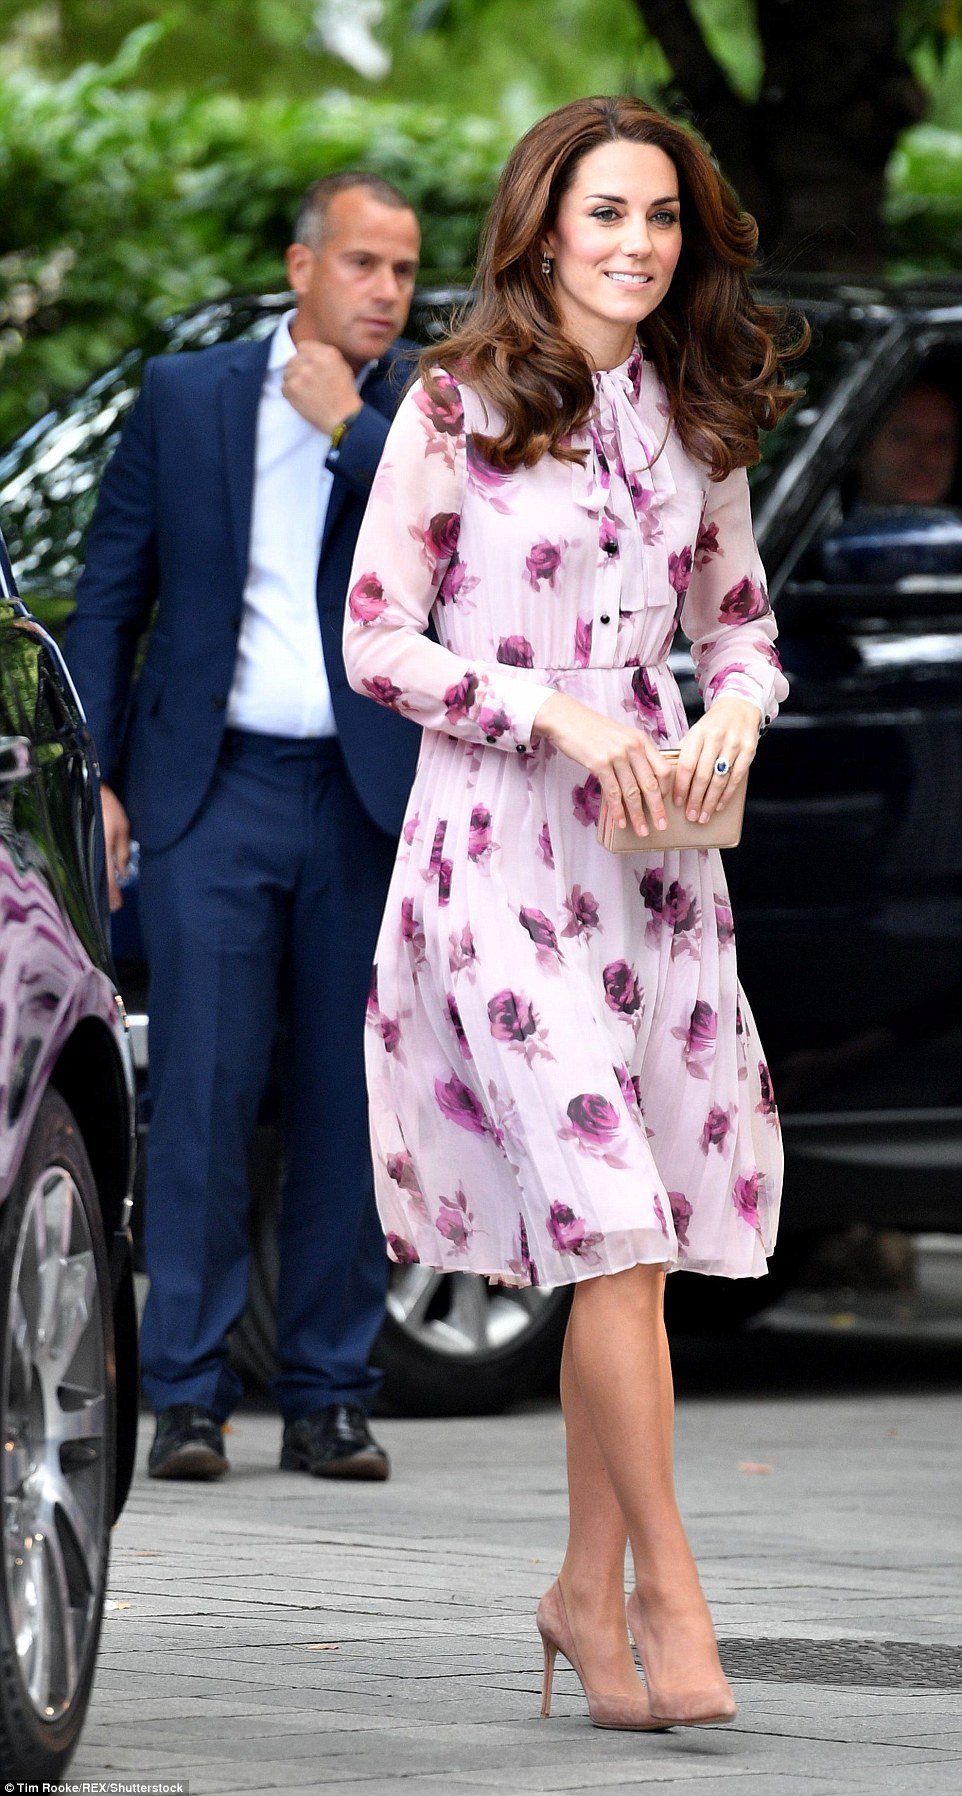 Kate Middleton stepped out this week for World Mental Health Day in a beautiful, soft pink Kate Spade dress.  She paired the floral, midi dress with nude pumps and a box clutch.